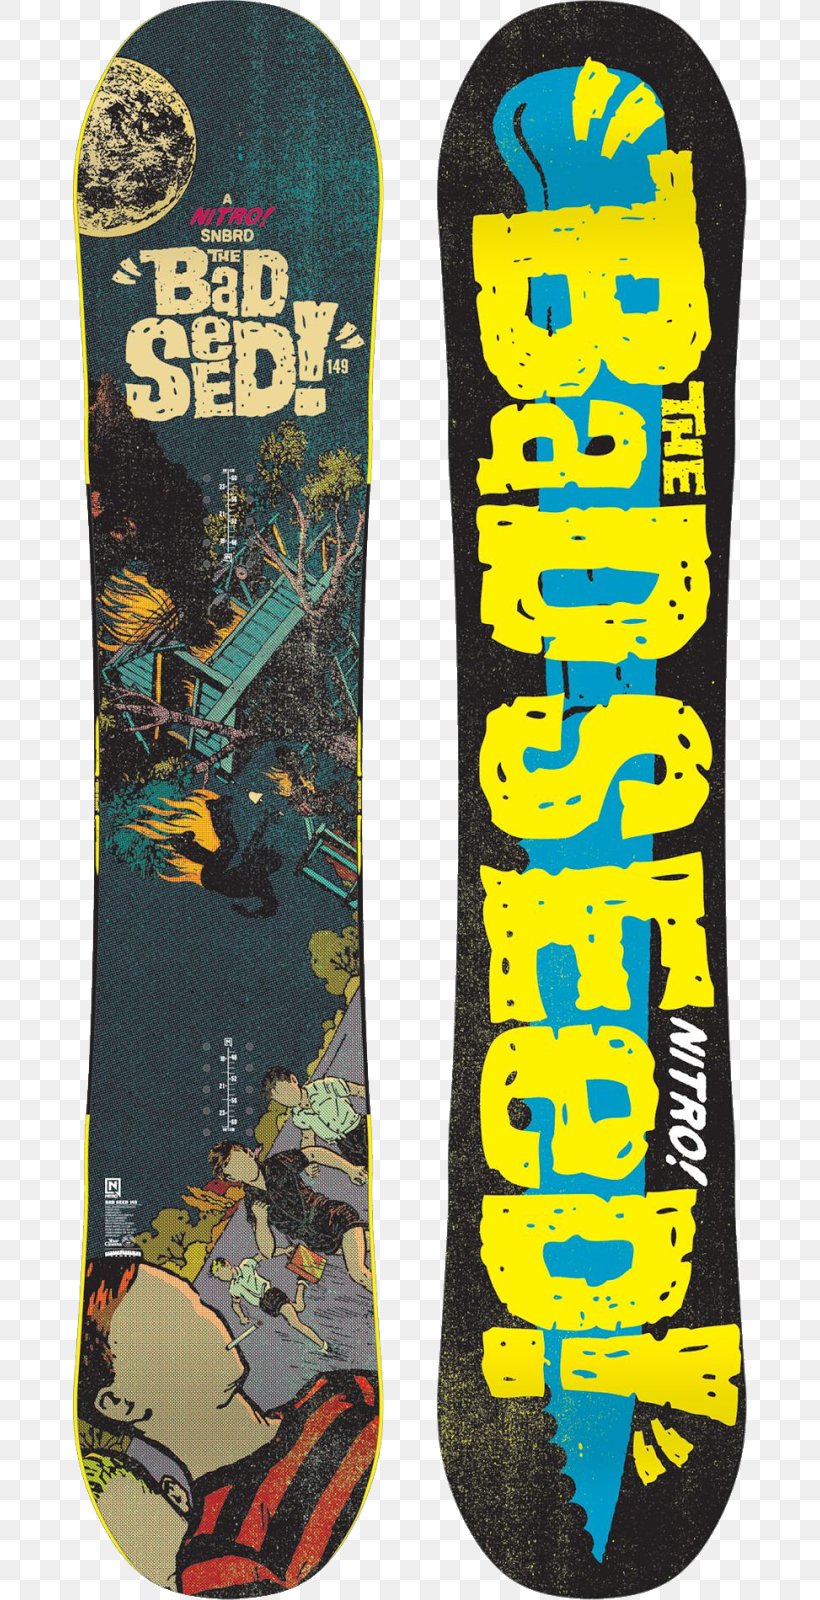 Nitro Snowboards Sporting Goods Text, PNG, 674x1600px, 2019, Snowboard, Guitar, Mountain Bike, Nitro Snowboards Download Free